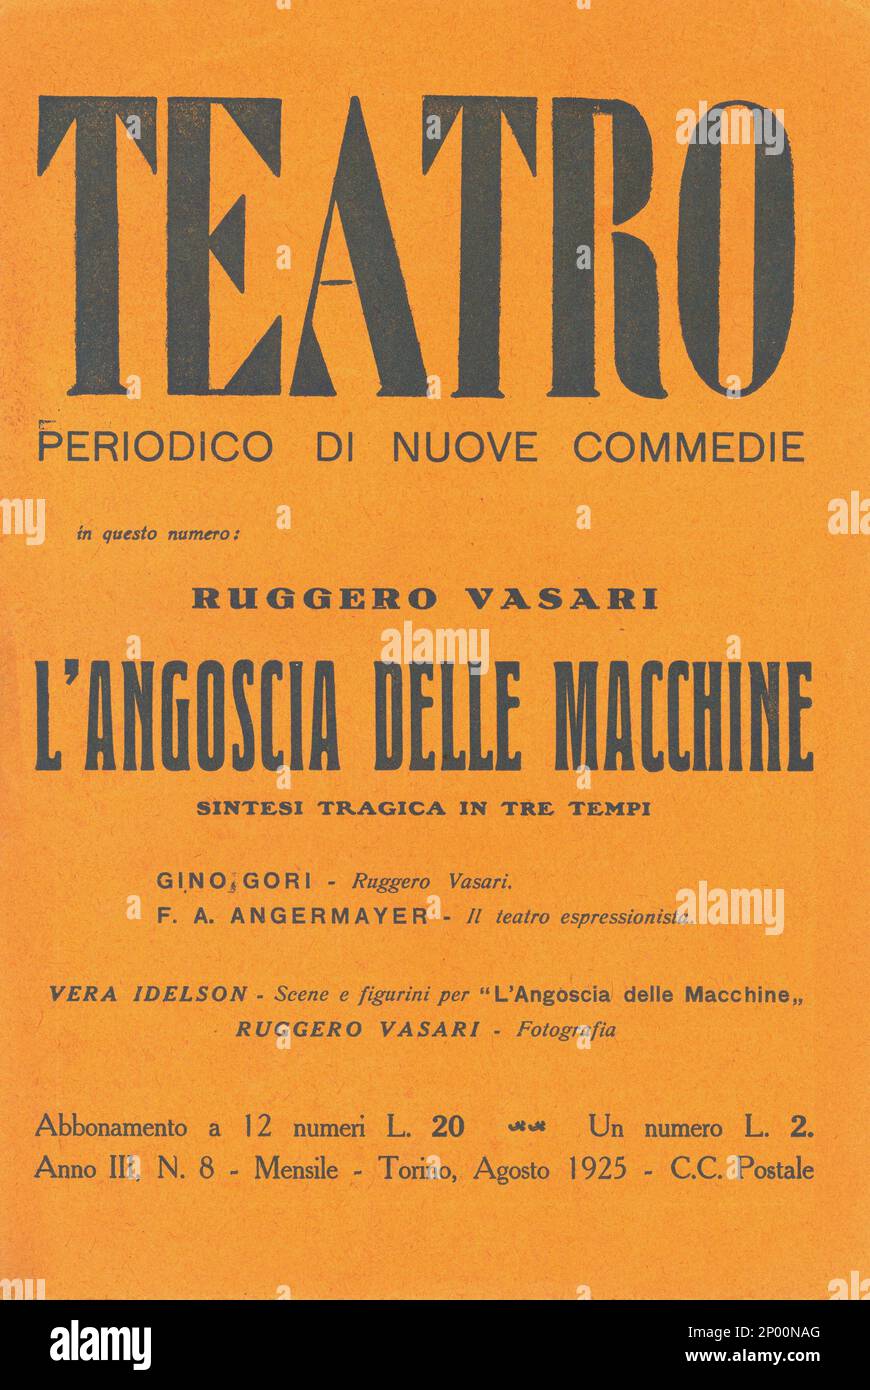 1925 , august  : The cover of italian magazine TEATRO with the enterely issue dedicated to  futurist artist and playwriter RUGGERO VASARI ( Messina 1898 - 1968 )  and his avangarde comedy L' ANGOSCIA DELLE MACCHINE  , played for the first time in Paris , Theatre Art et Action , the day 27 april 1927 - TEATRO - THEATRE - THEATER - AVANGUARDIA STORICA - AVANGUARDIE STORICHE - PERFORMINGS ARTS - ARTE - ARTI VISIVE - VISUAL  - FUTURISMO - FUTURISTA - FUTURISM  - AVANGUARDIE - copertina di rivista - cover  ----  Archivio GBB Stock Photo